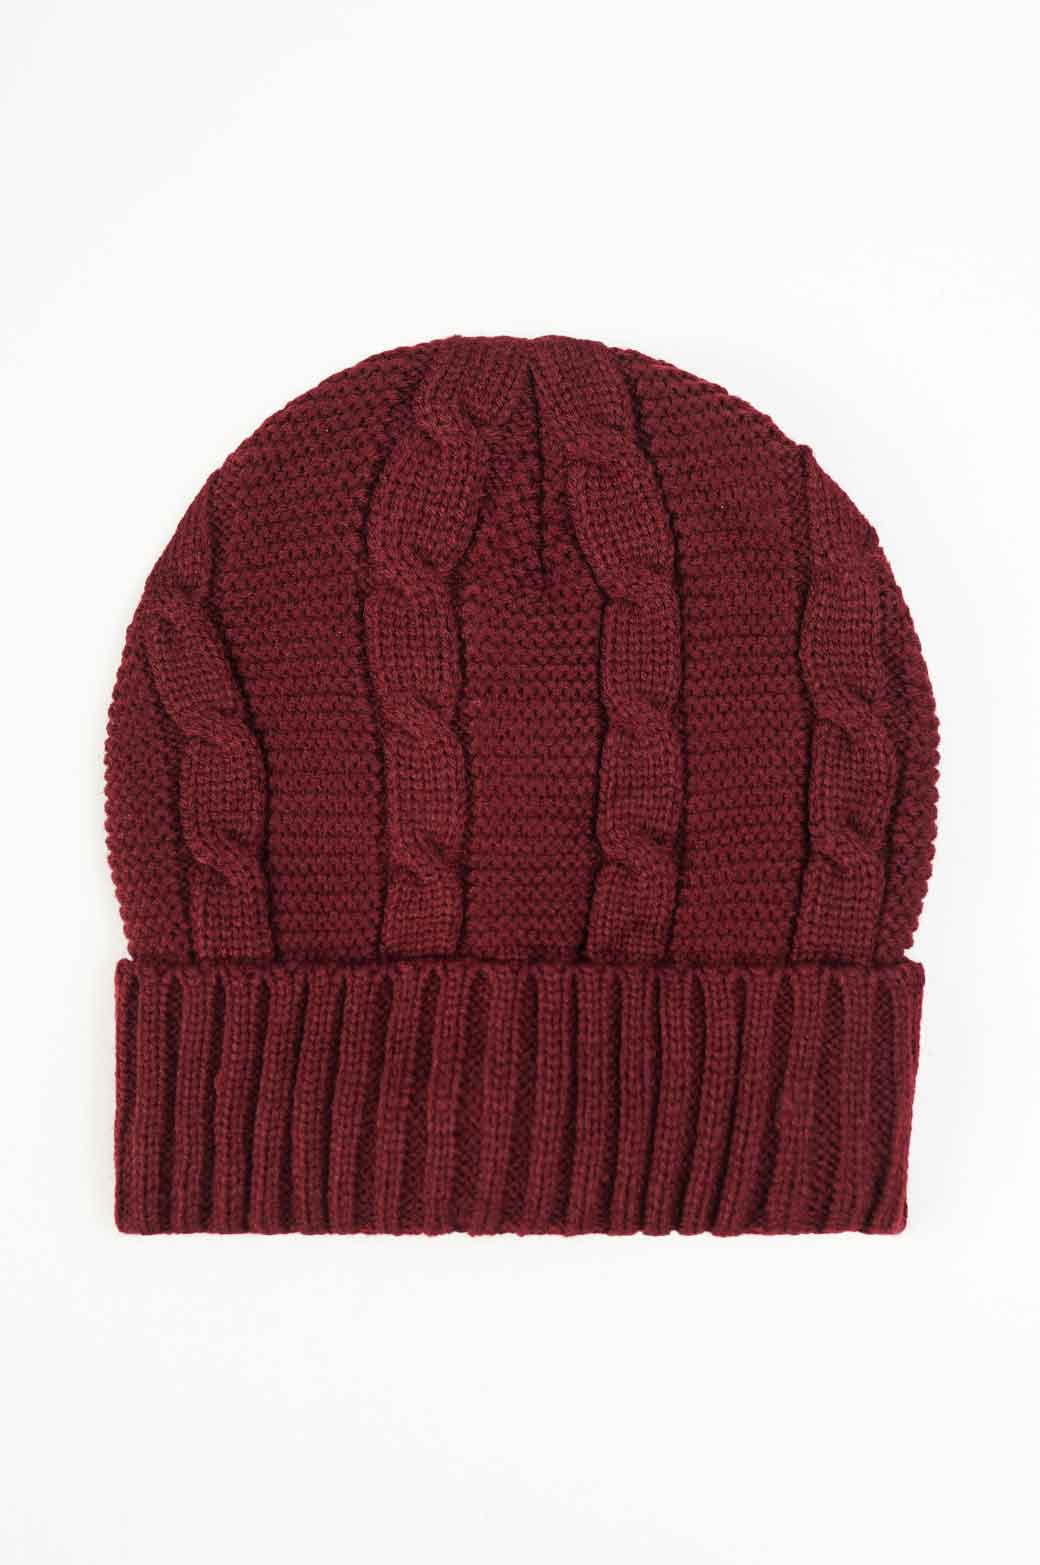 Knitted No-Static Beanie - Valetica Sports